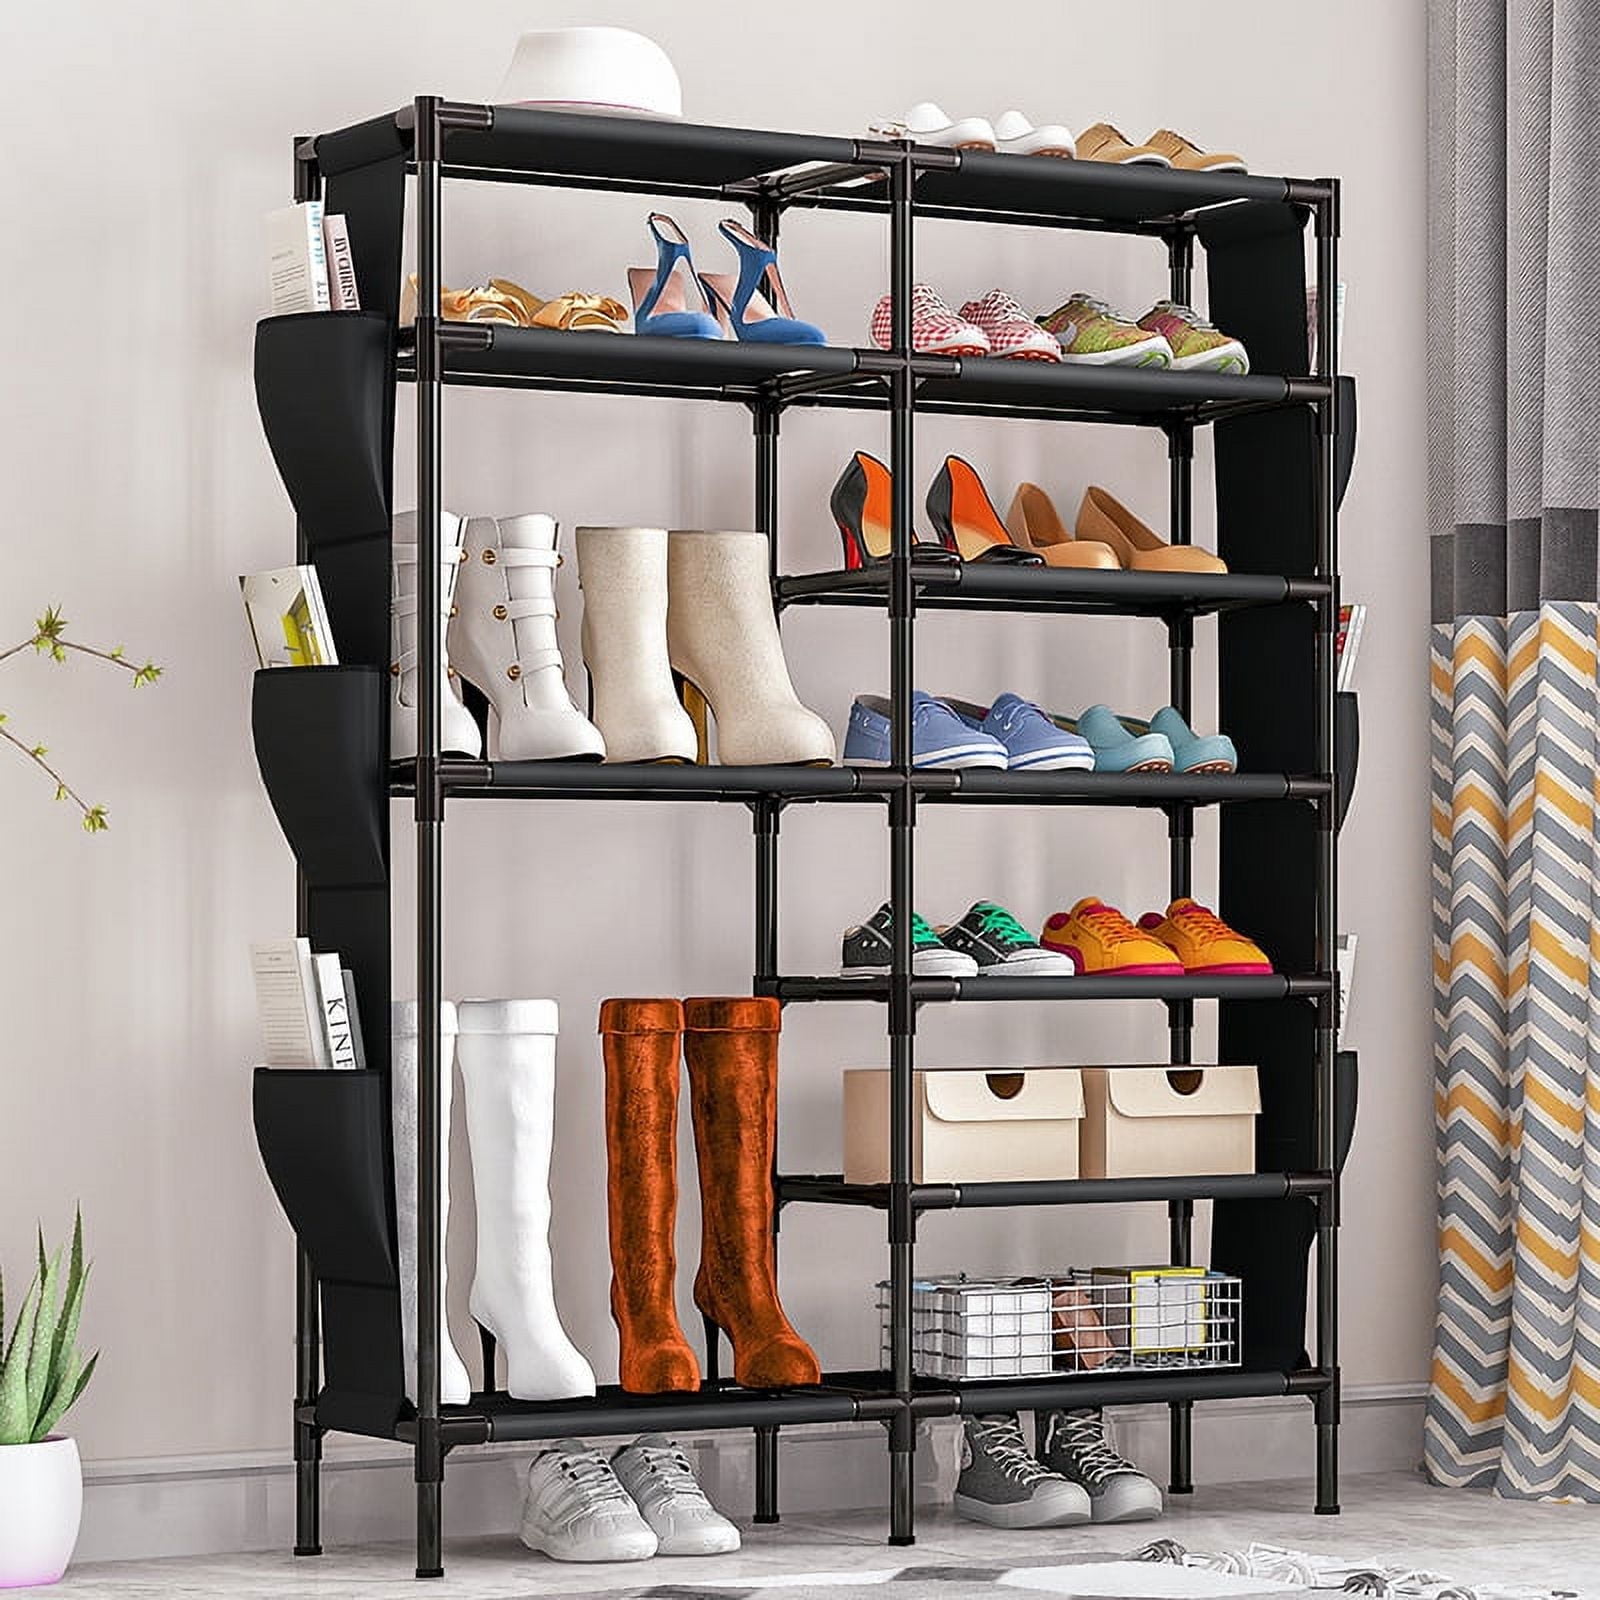 JIUYOTREE 7-Tier Shoe Rack with Dustproof Cover Shoe Storage Organizer Closet Shoe Cabinet Shelf Hold Up to 28 Pairs of Shoes Fo